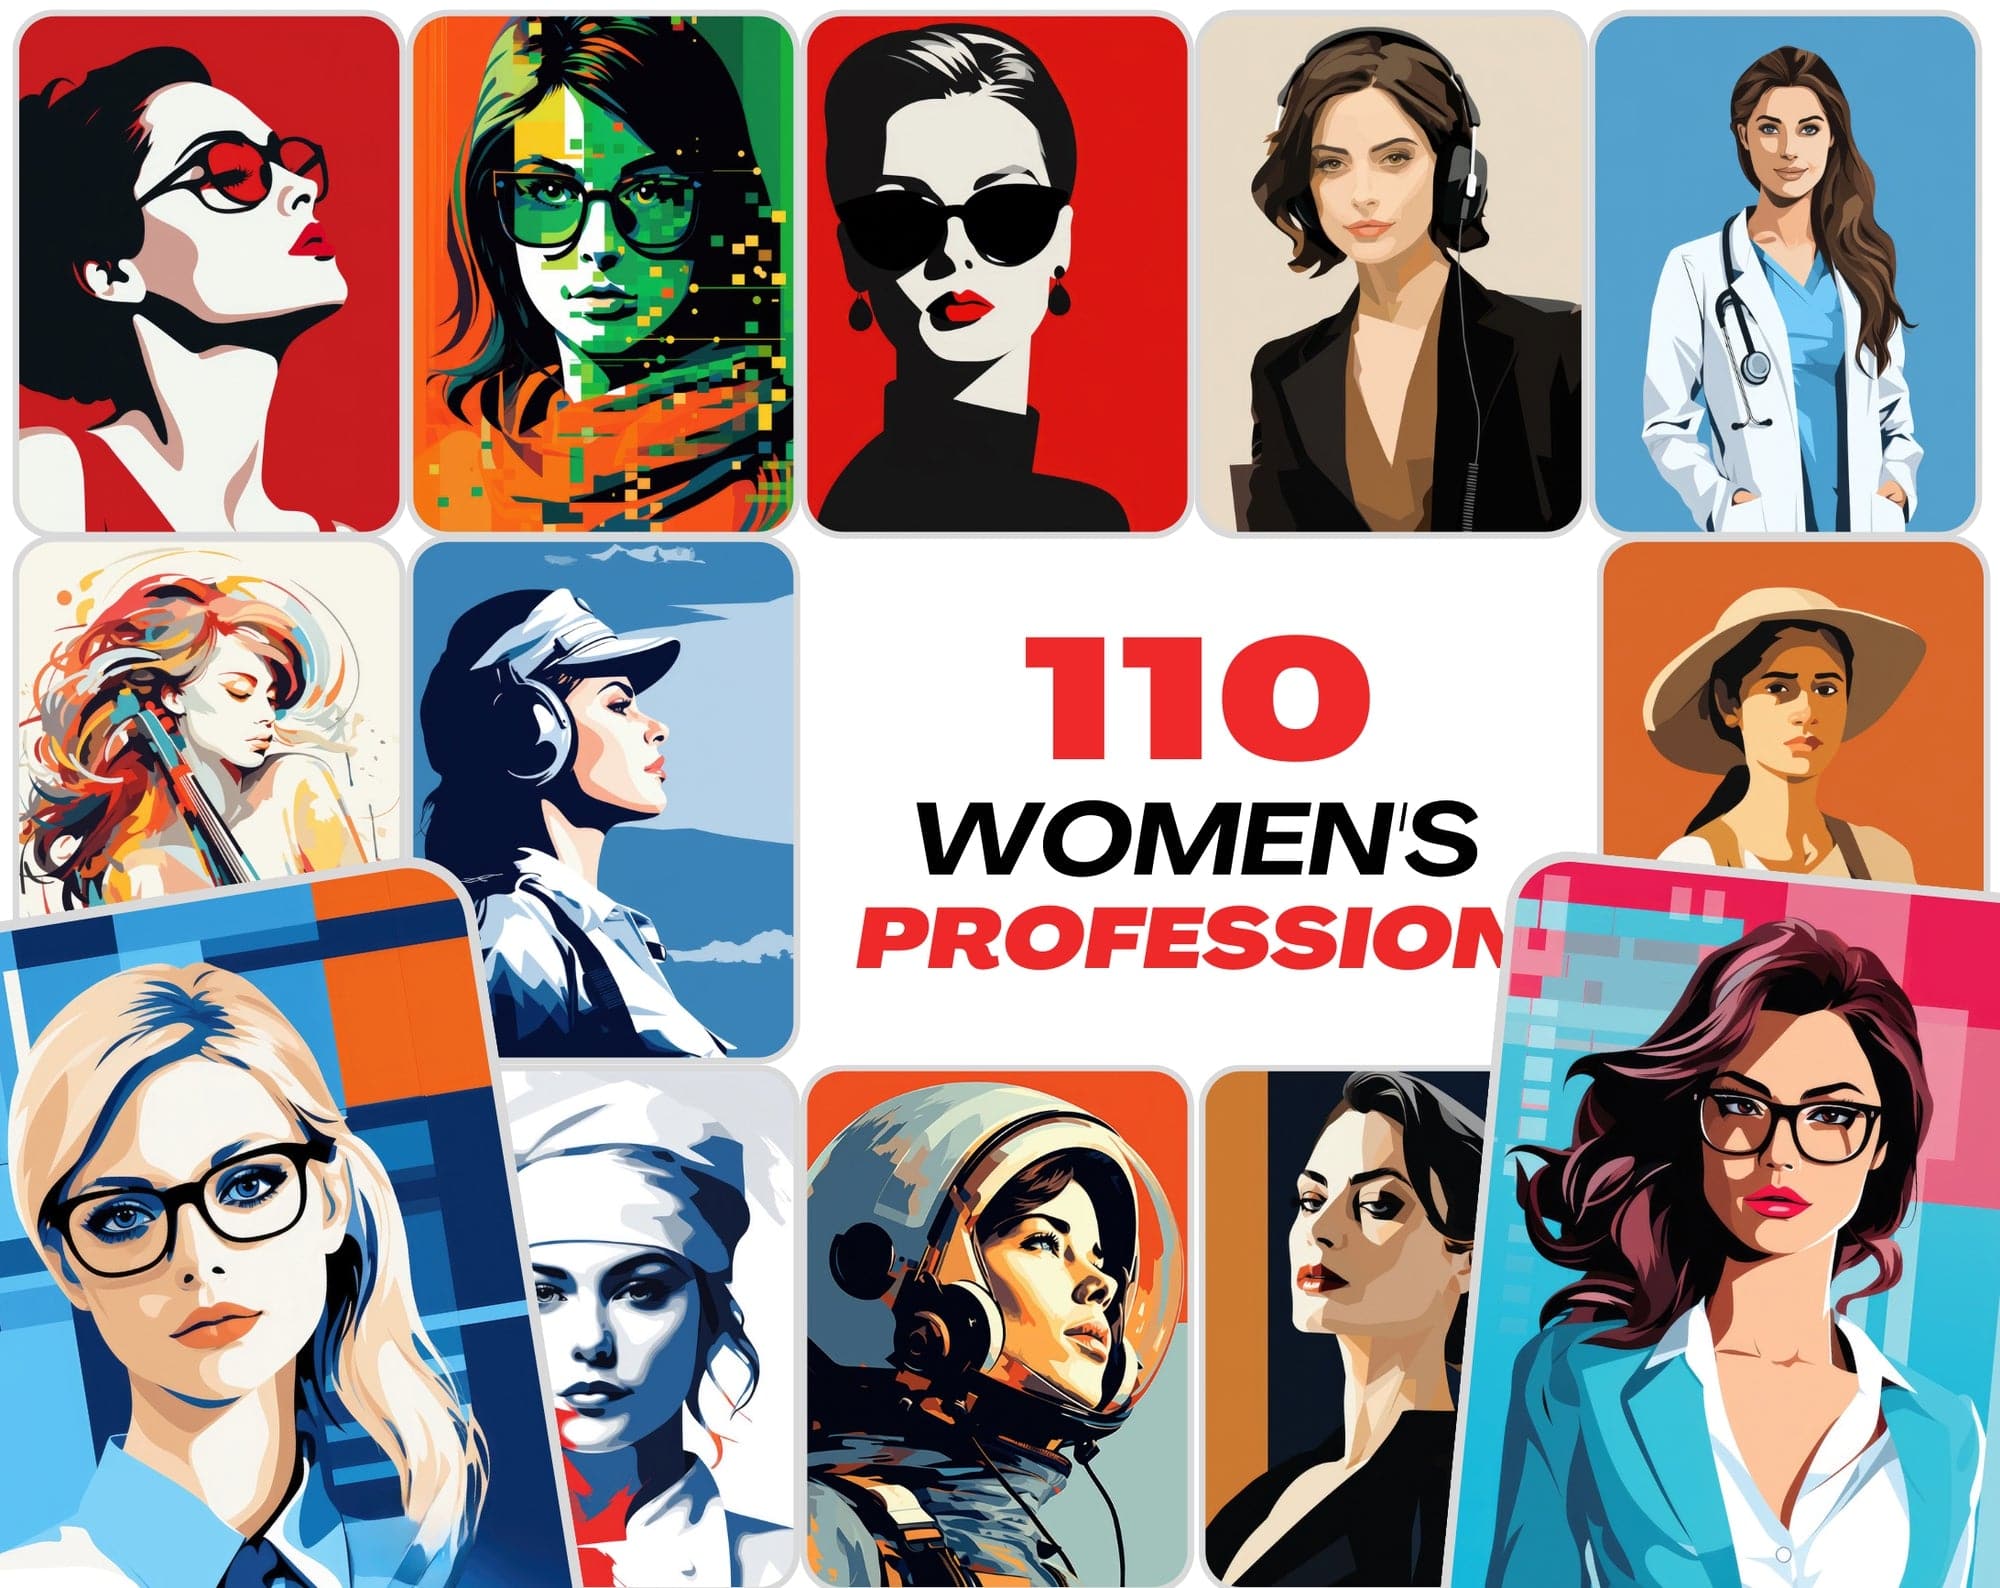 Women's Professions in PNGs - 110 Vibrant High-Resolution Images Depicting Various Jobs Digital Download Sumobundle